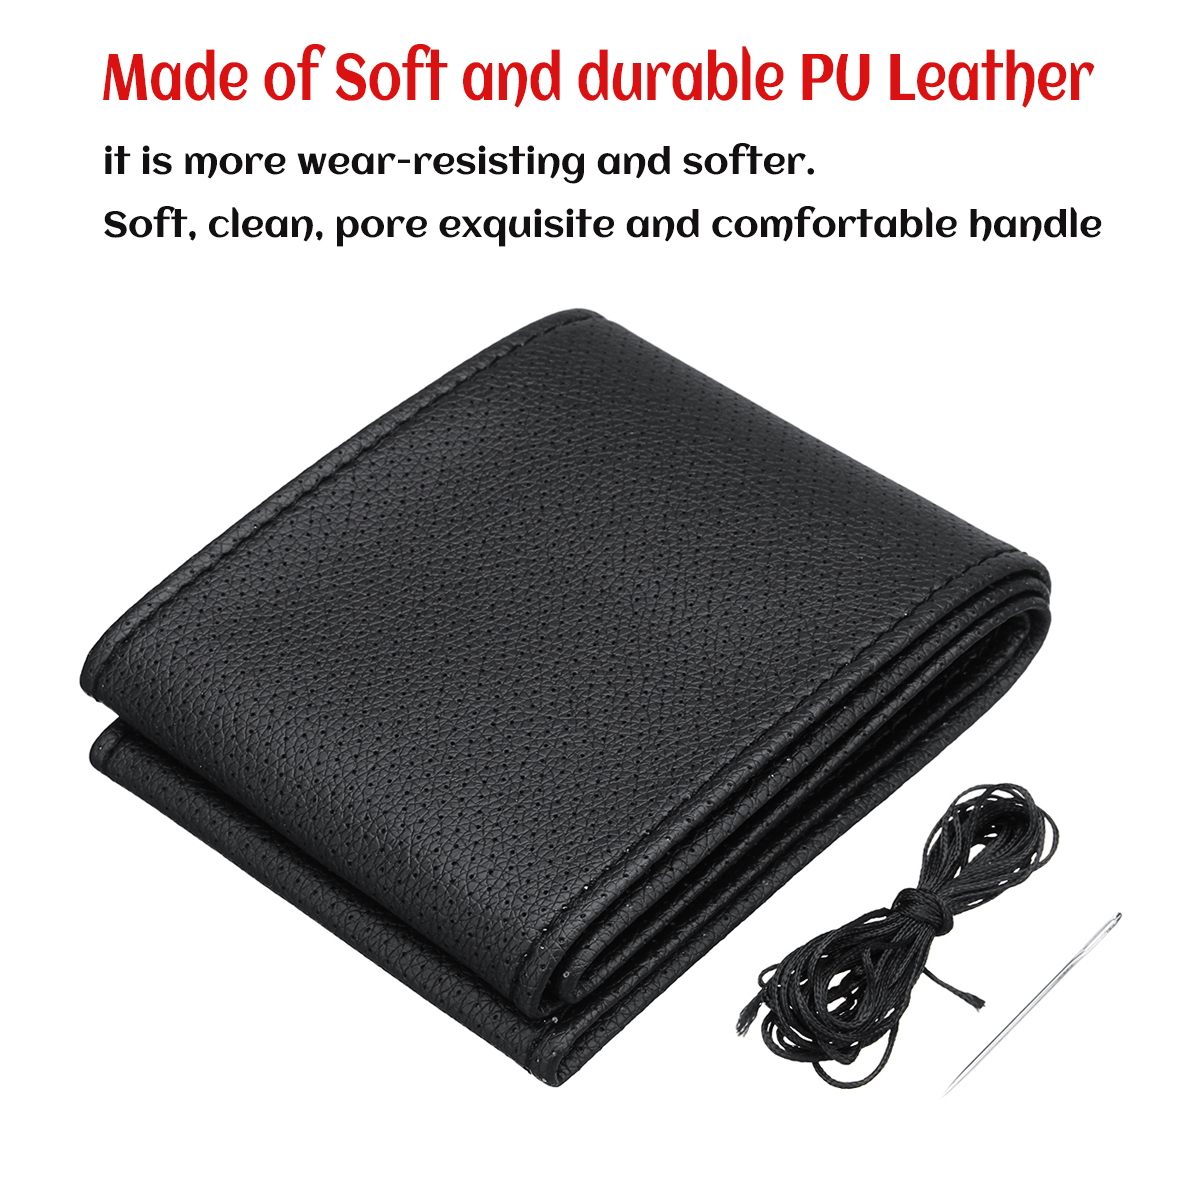 DIY-Car-Steering-Wheel-Covers-PU-Leather-Protector-with-Needle-and-Thread-37-38cm-Universal-1428768